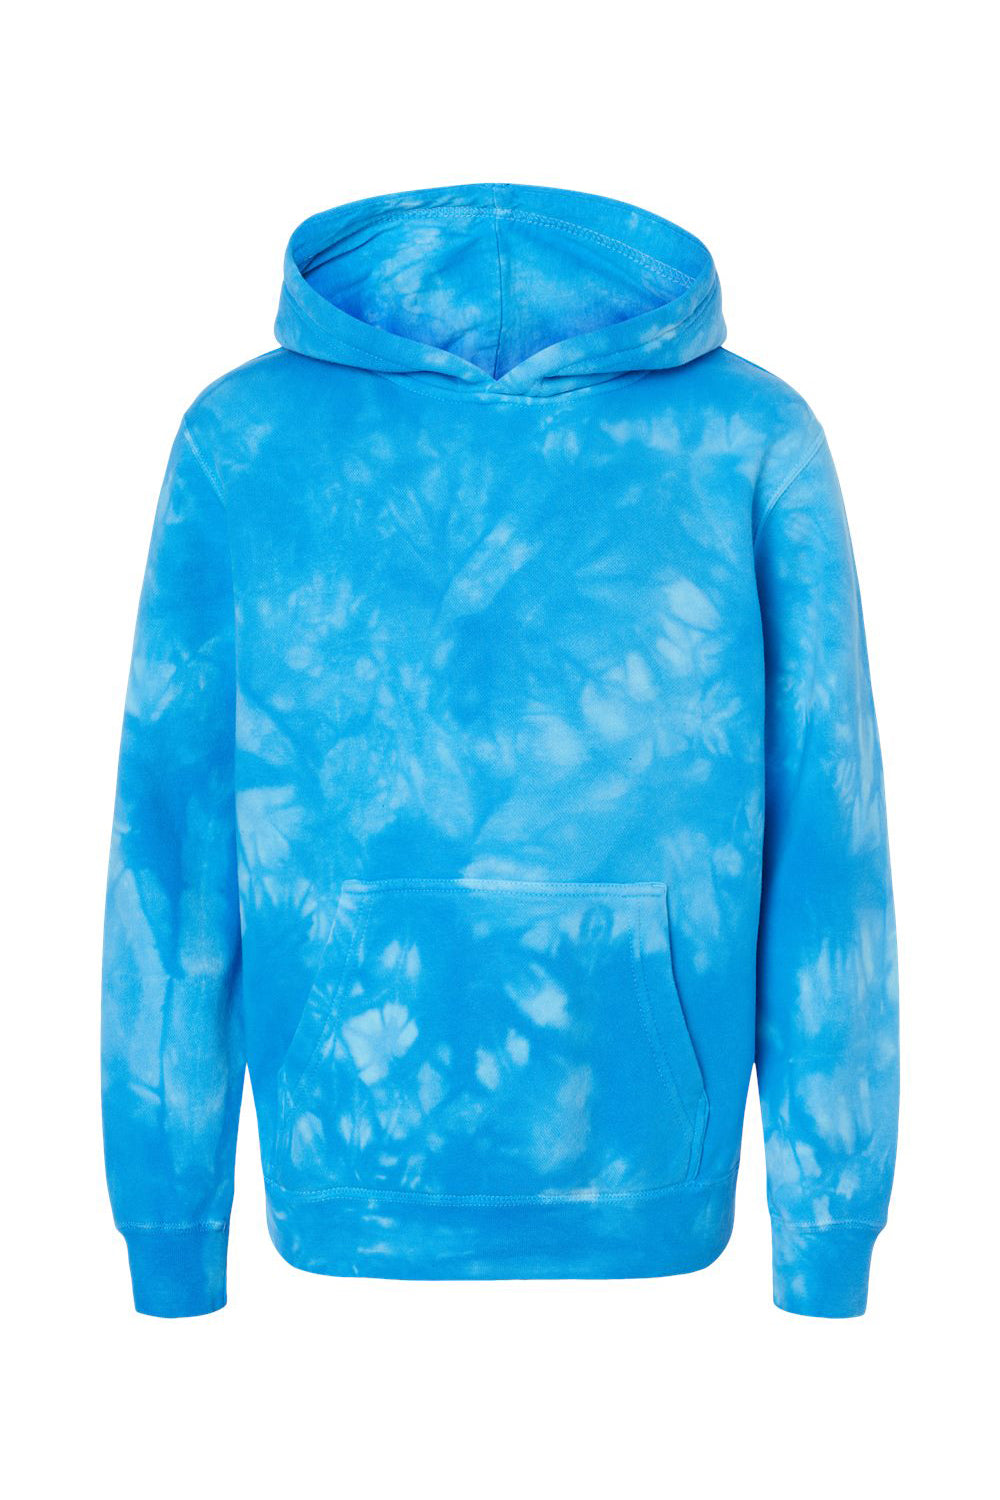 Independent Trading Co. PRM1500TD Youth Tie-Dye Hooded Sweatshirt Hoodie Aqua Blue Flat Front